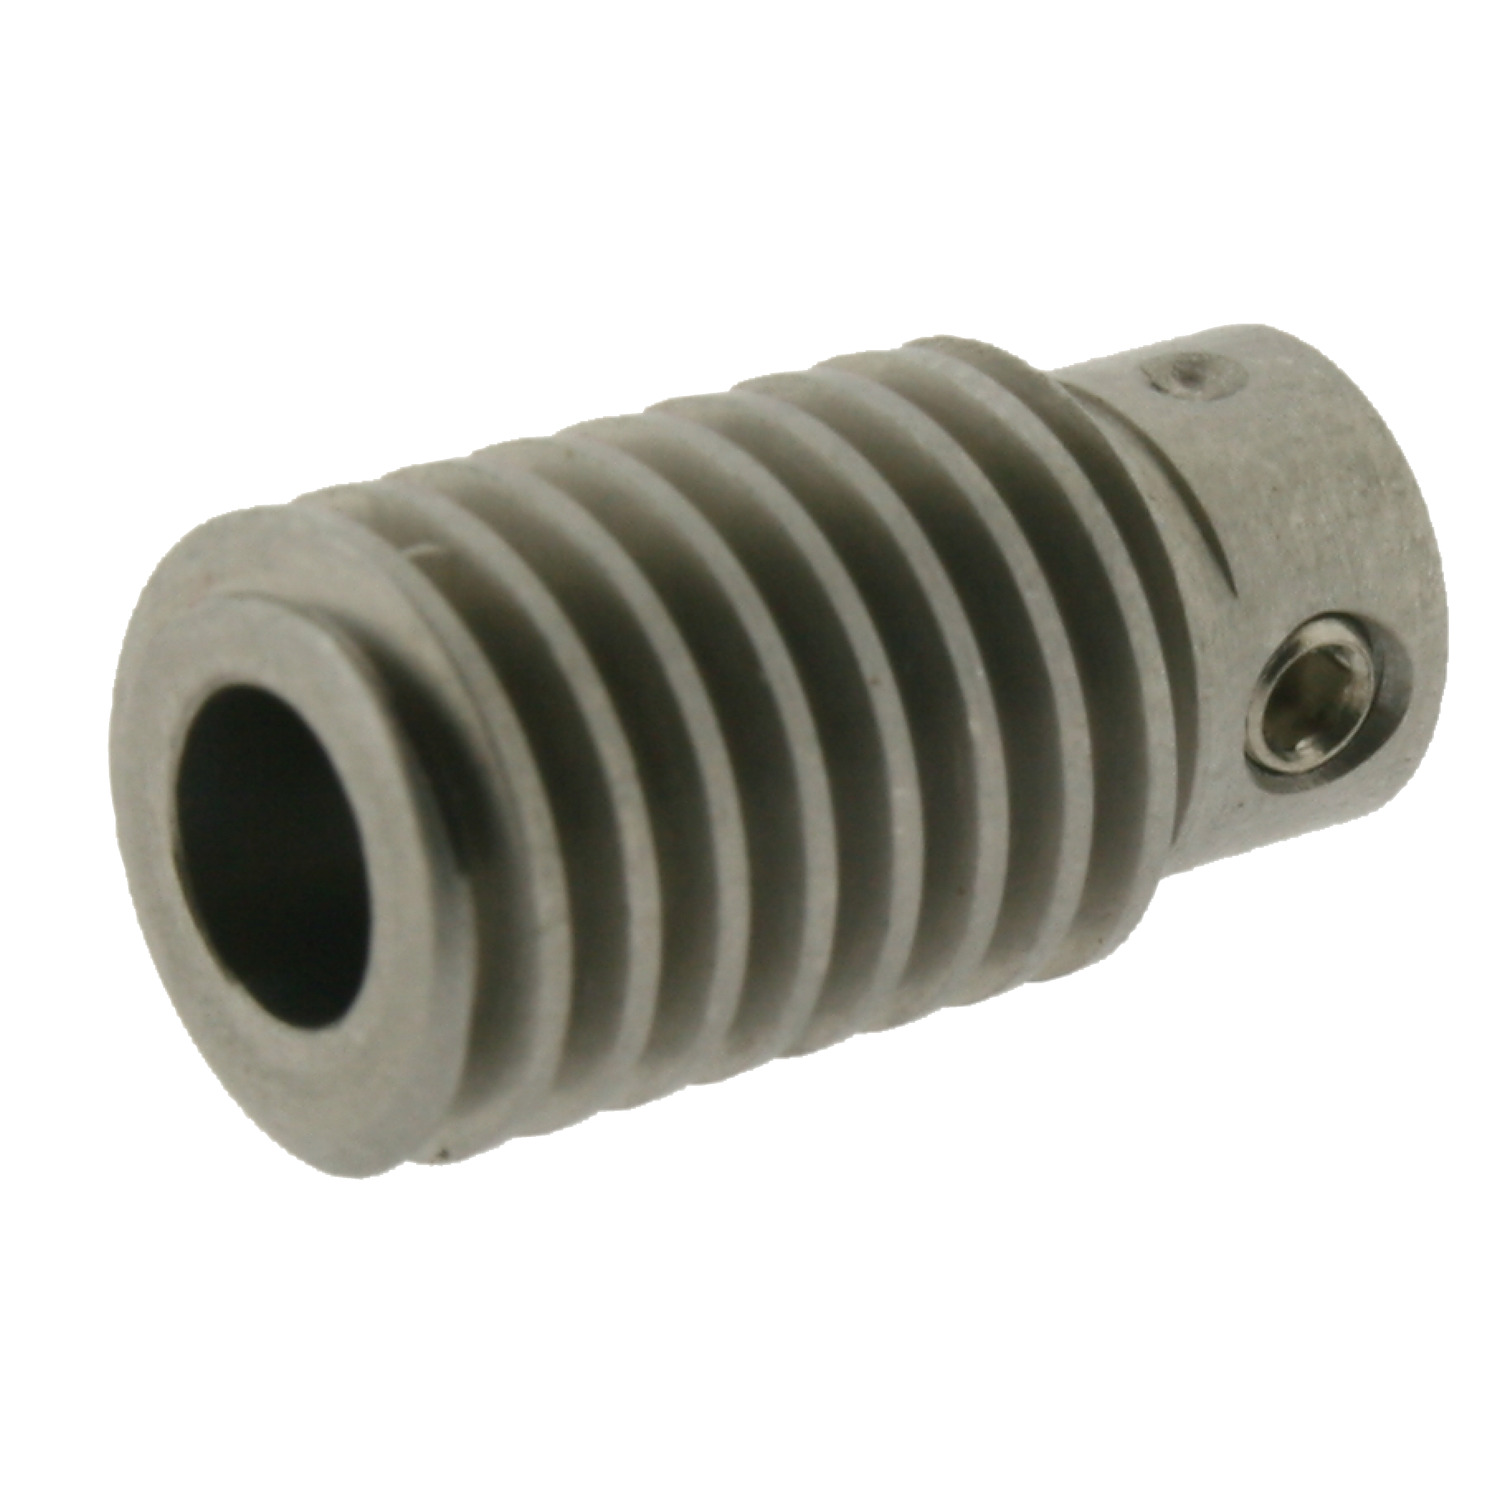 Precision Worms - Module 0,4 Stainless Steel (DIN 1,4305). Right handed stainless steel precision worm gears.